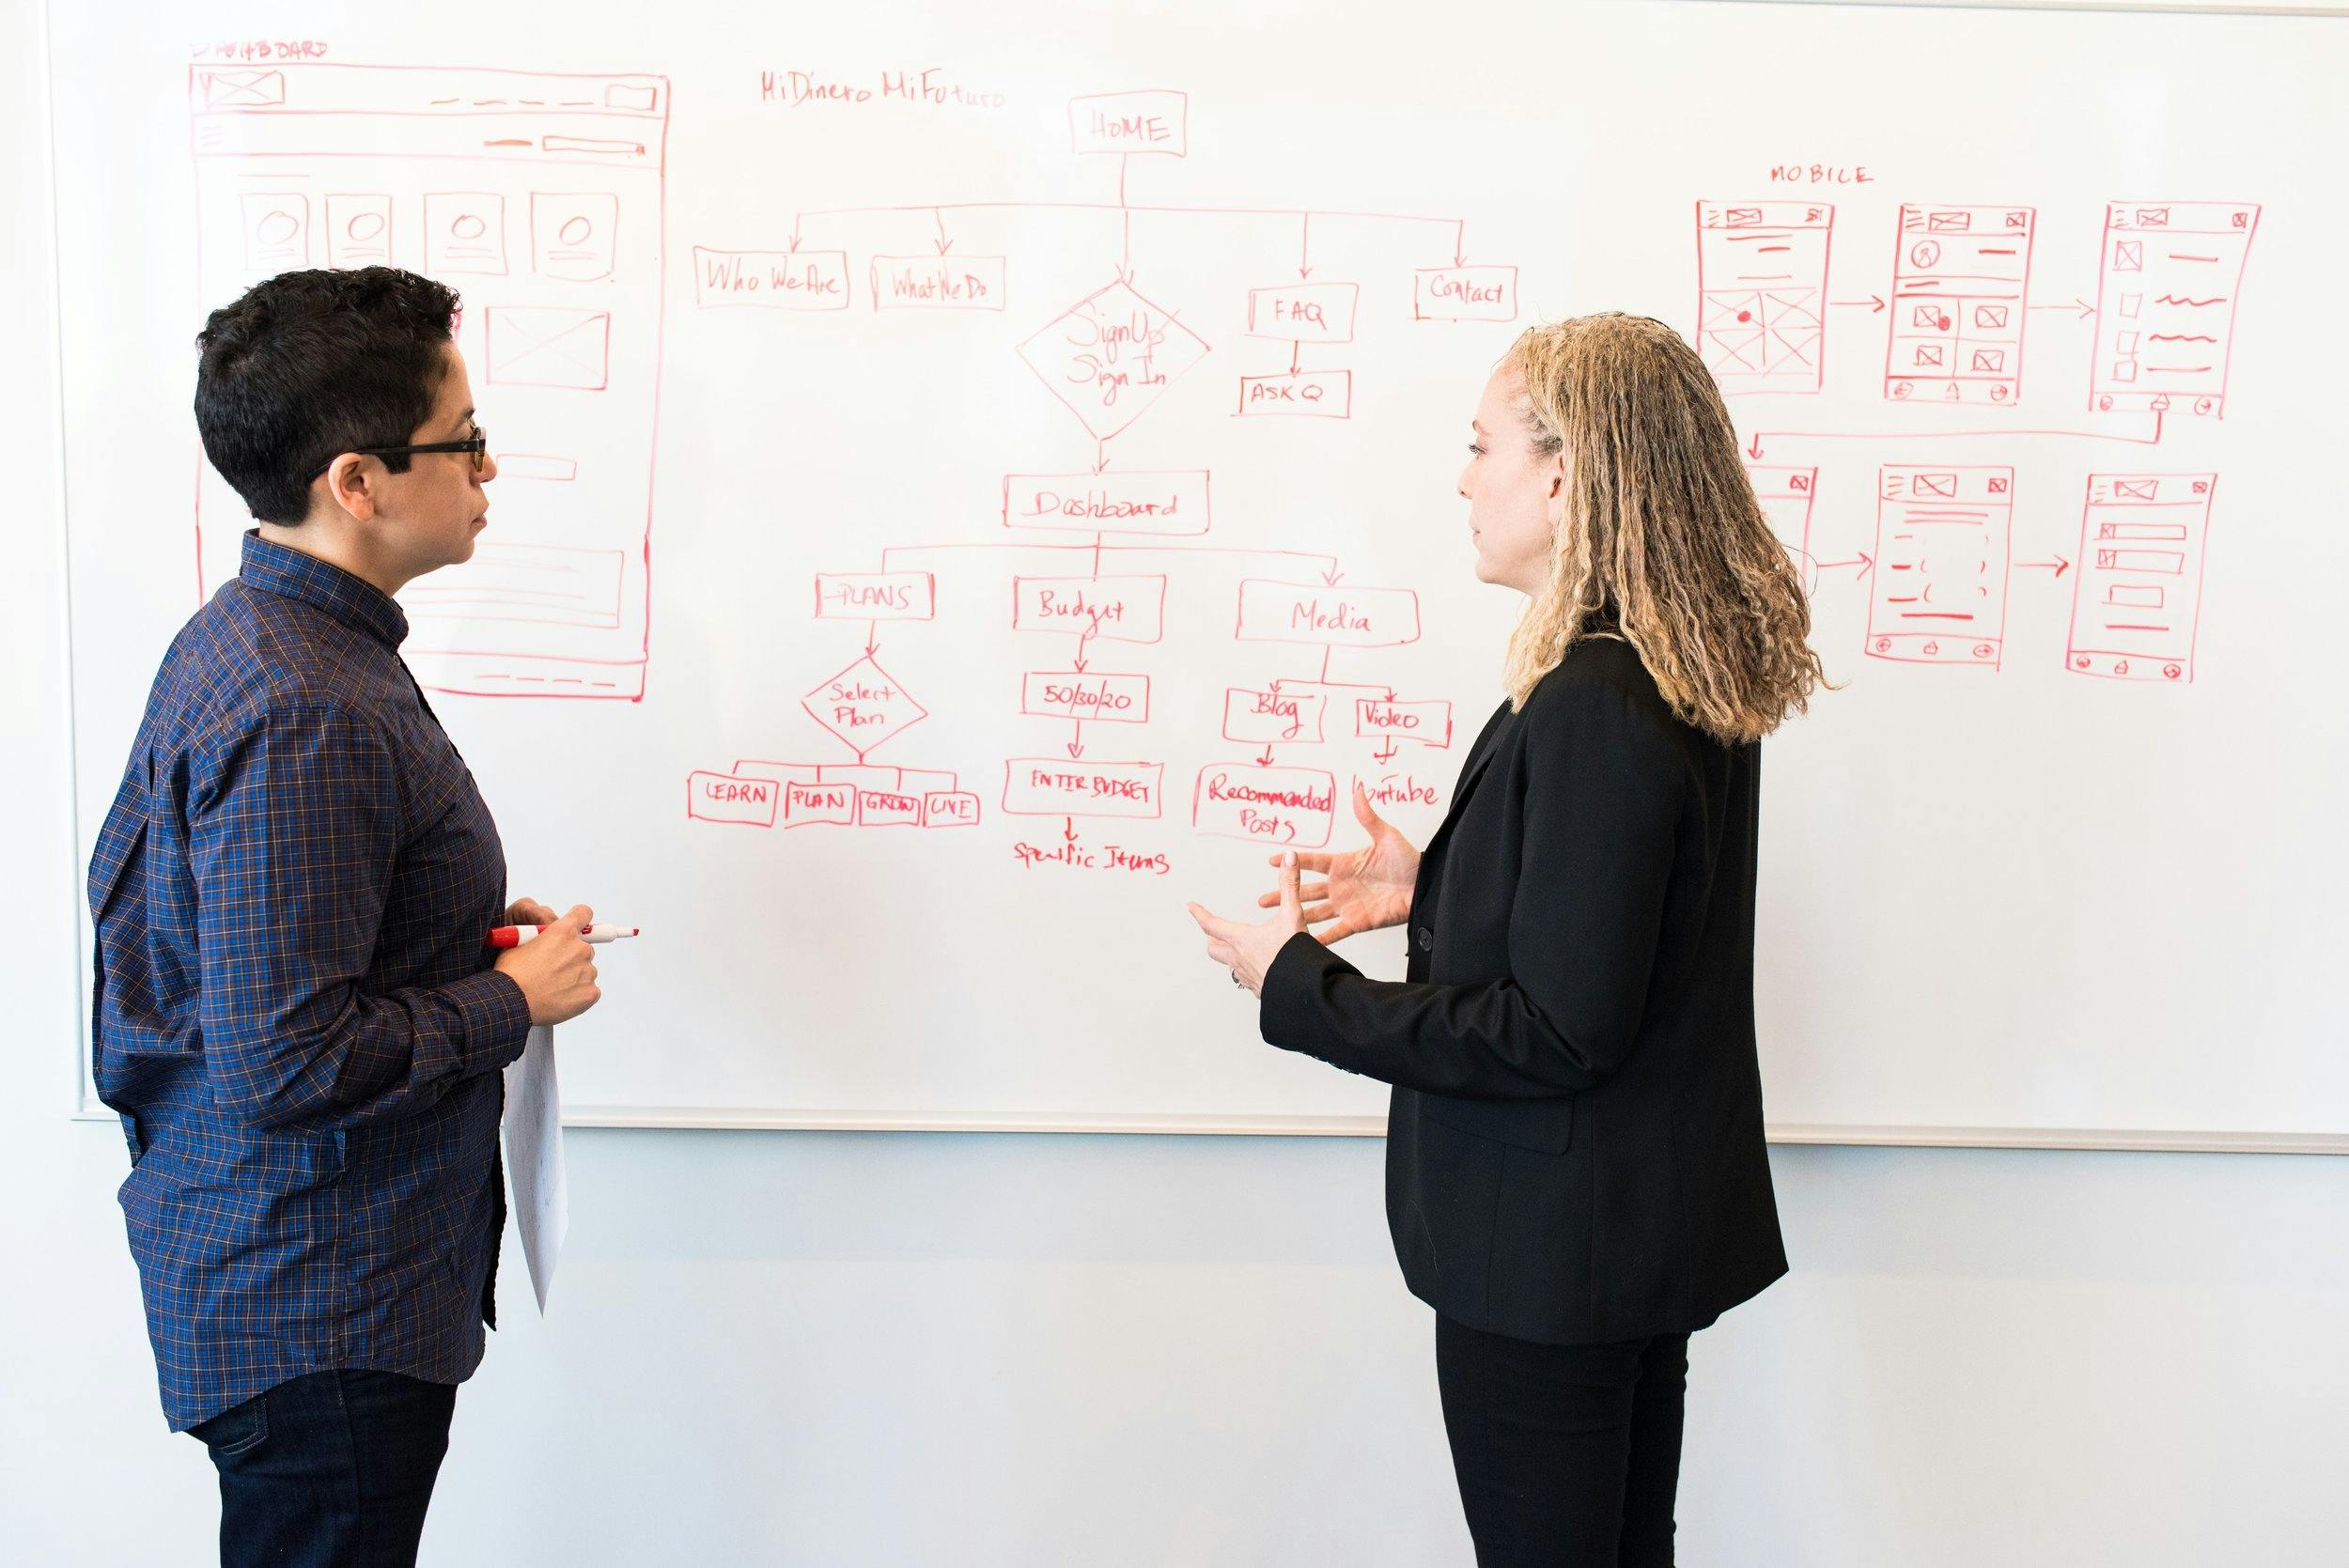 Two people stand in front of a whiteboard covered in diagrams drawn in red ink.